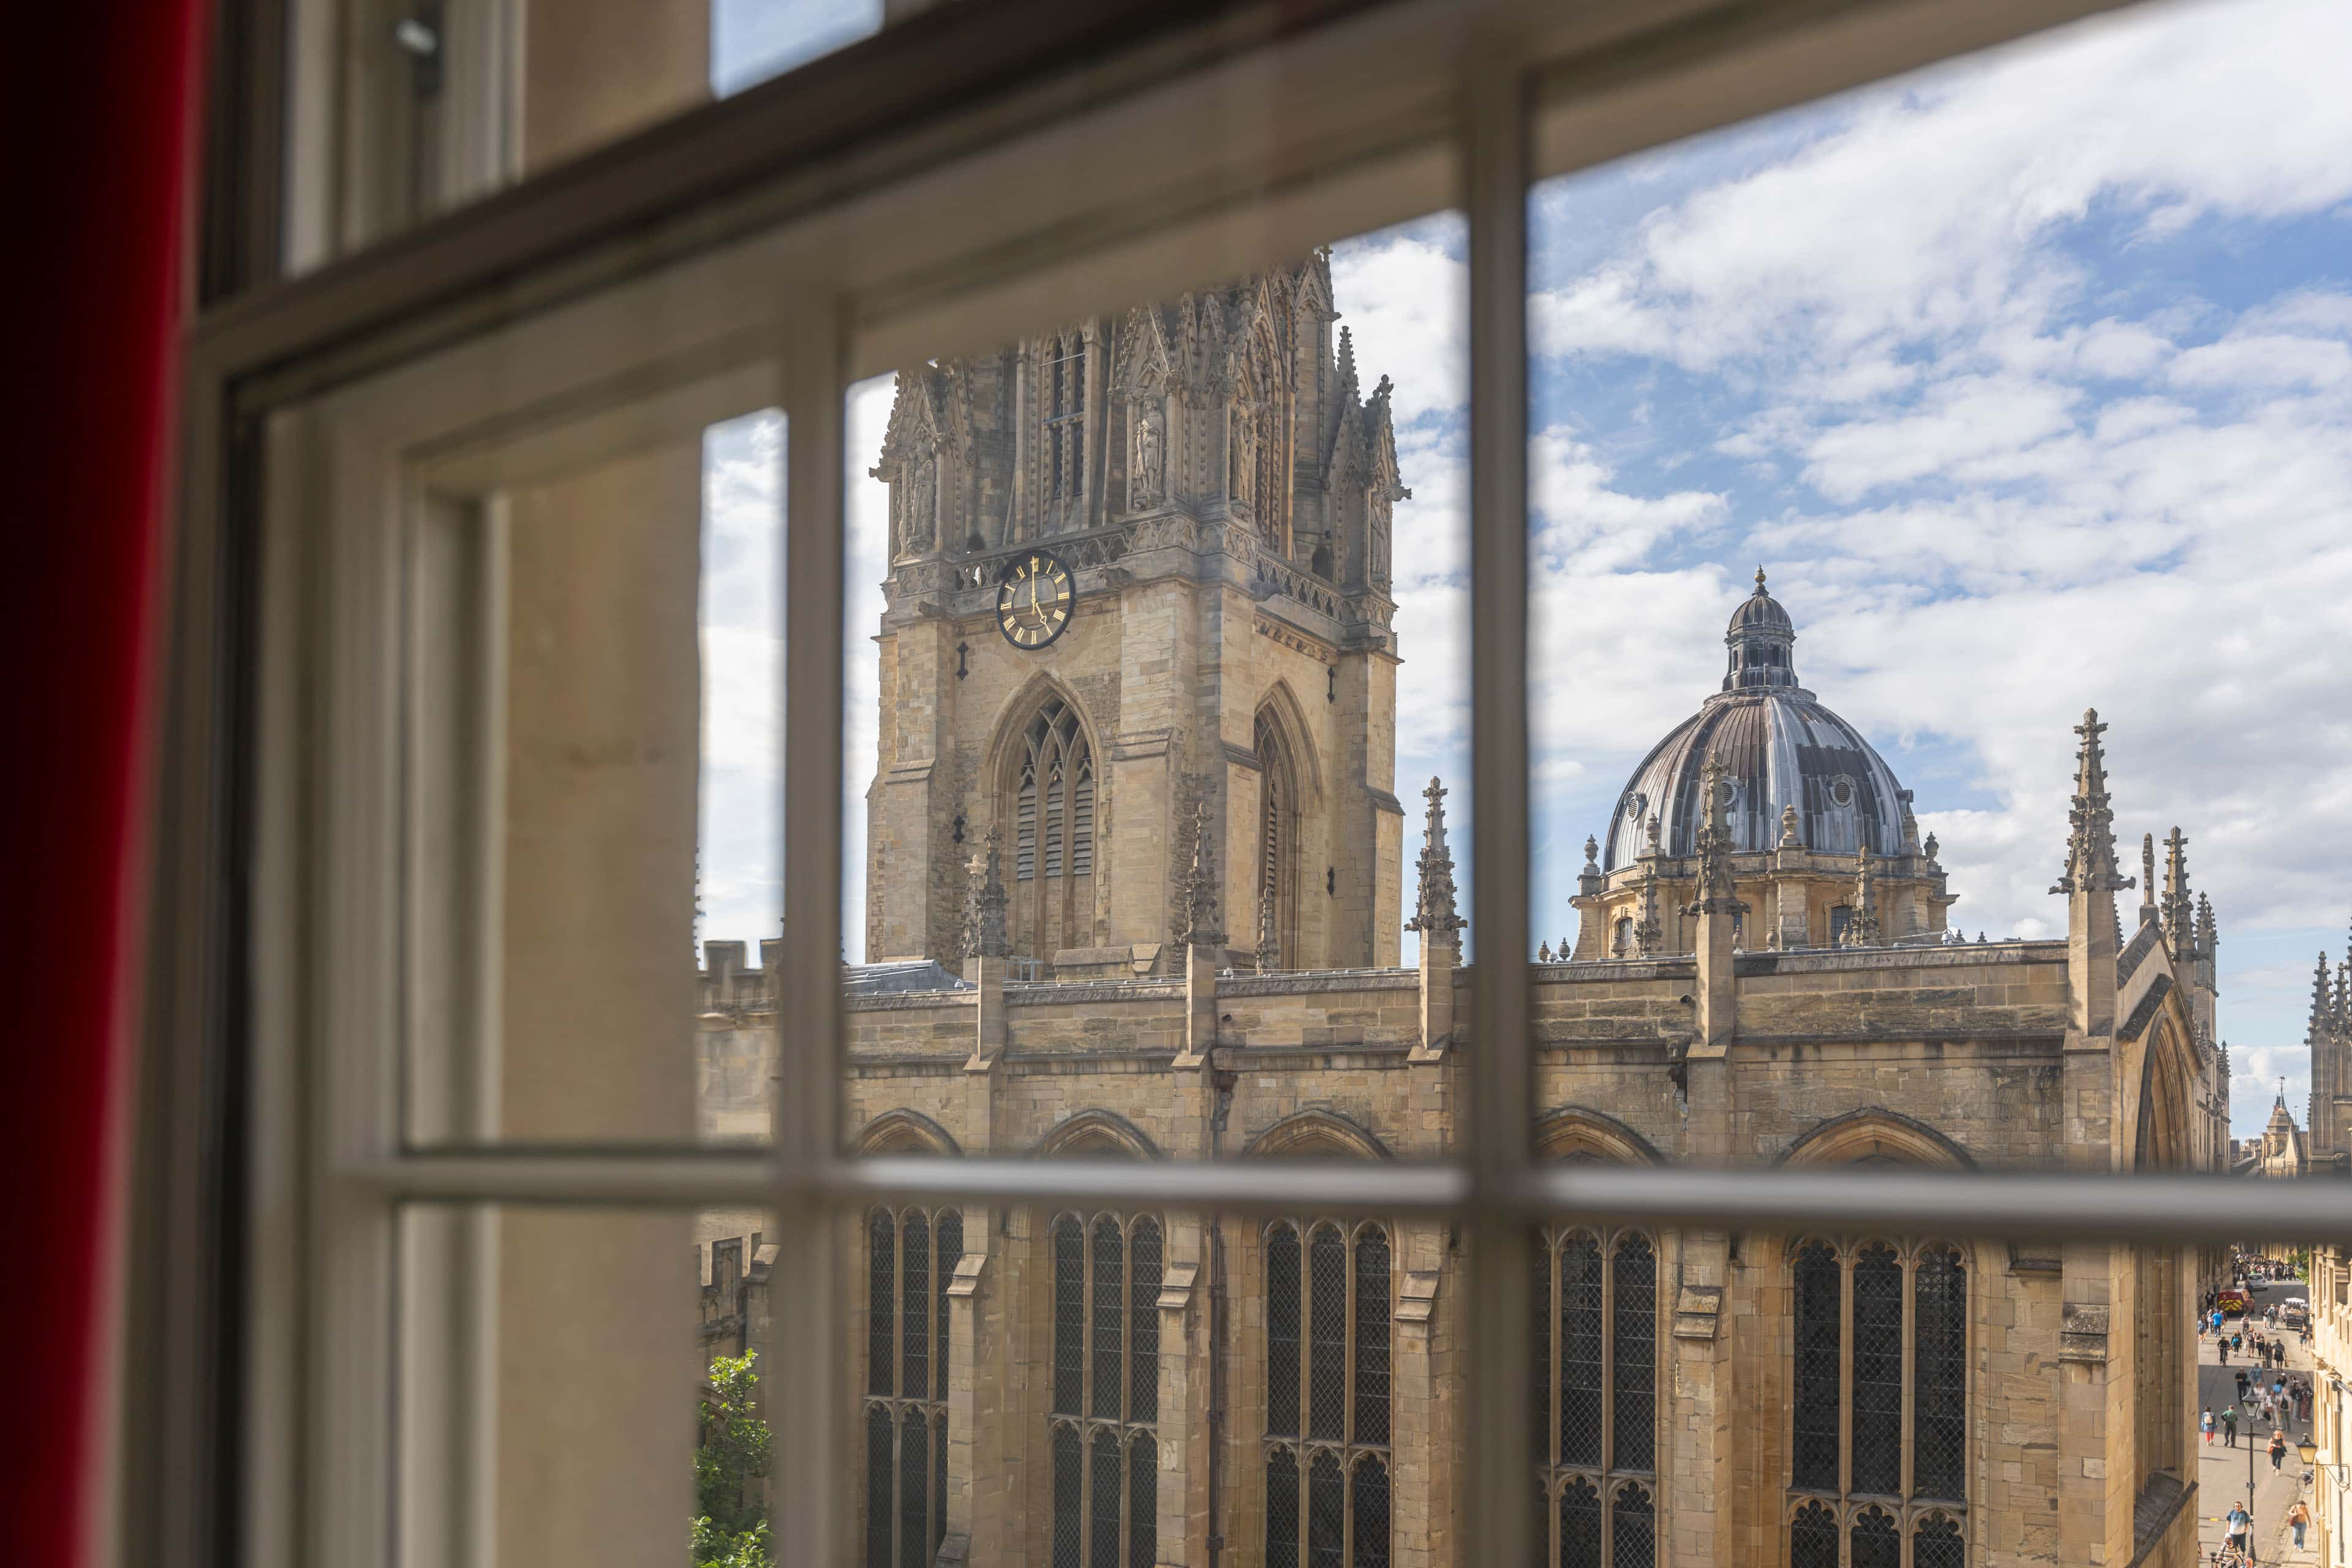 A7R06035 - 2023 - Old Bank Hotel - Oxford - High Res - Window Spires View University Church of St Mary the Virgin Radcliffe Camera Dome - Web Hero